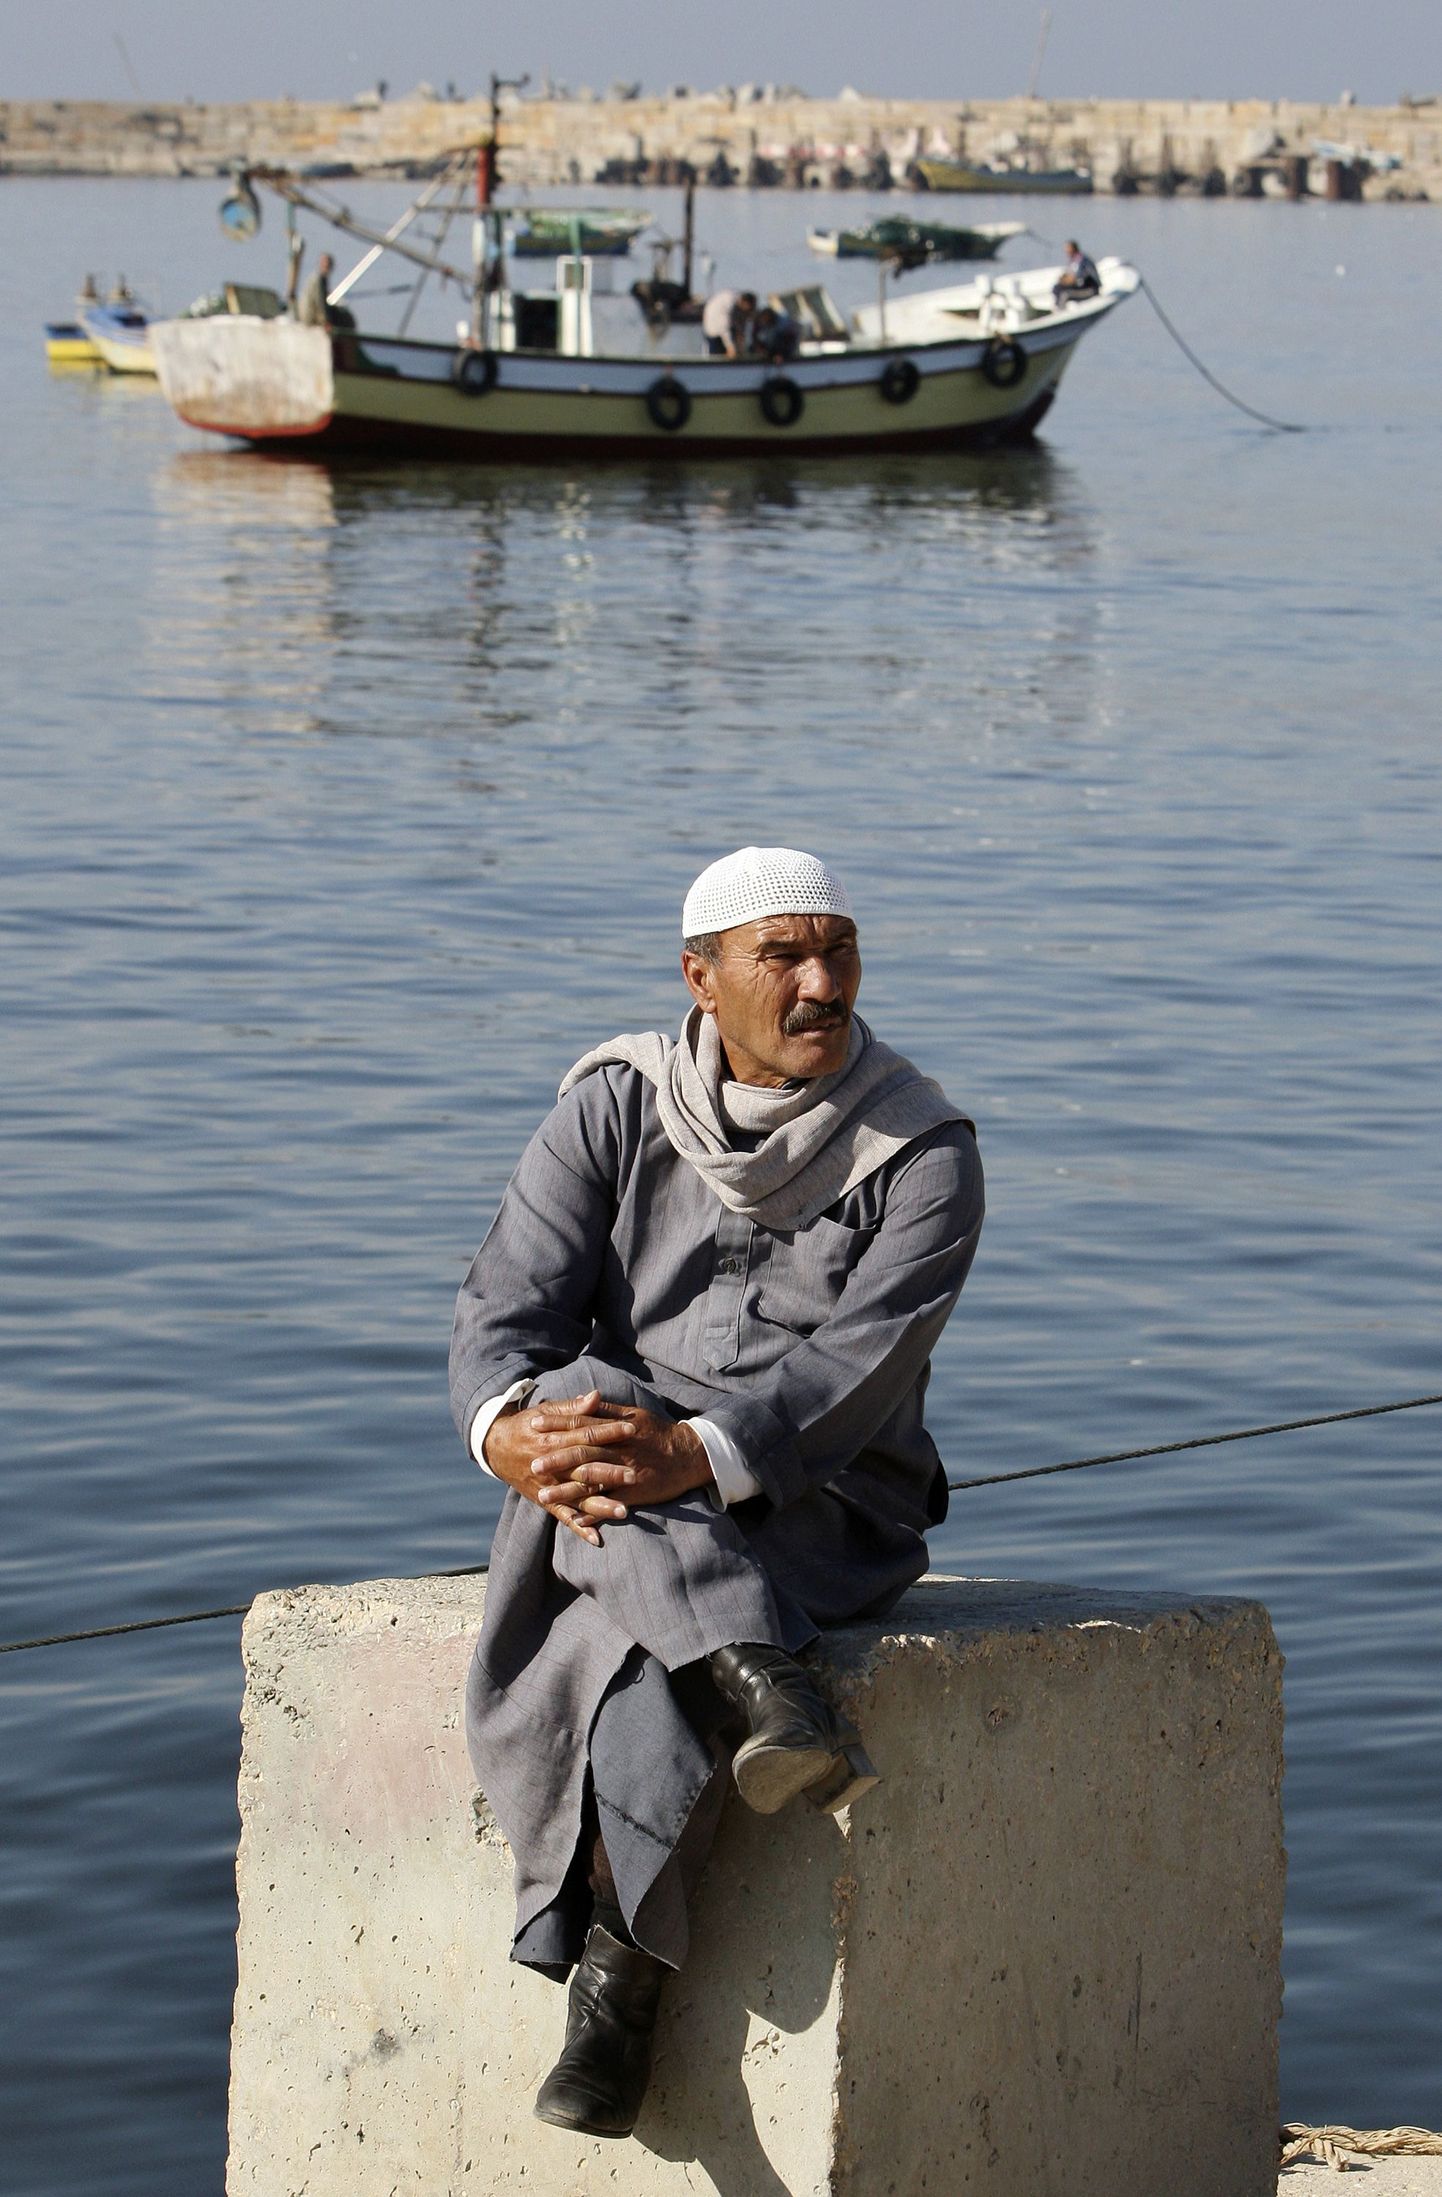 A Palestinian man waits for a Libyan ship at the seaport in Gaza December 1, 2008. The Israeli navy turned back a Libyan ship on Monday as it tried to transport humanitarian aid to the blockaded Gaza Strip, Palestinian officials said. They said the ship, Al-Marwa, sailed to a port in neighbouring Egypt instead. REUTERS/Suhaib Salem (GAZA)